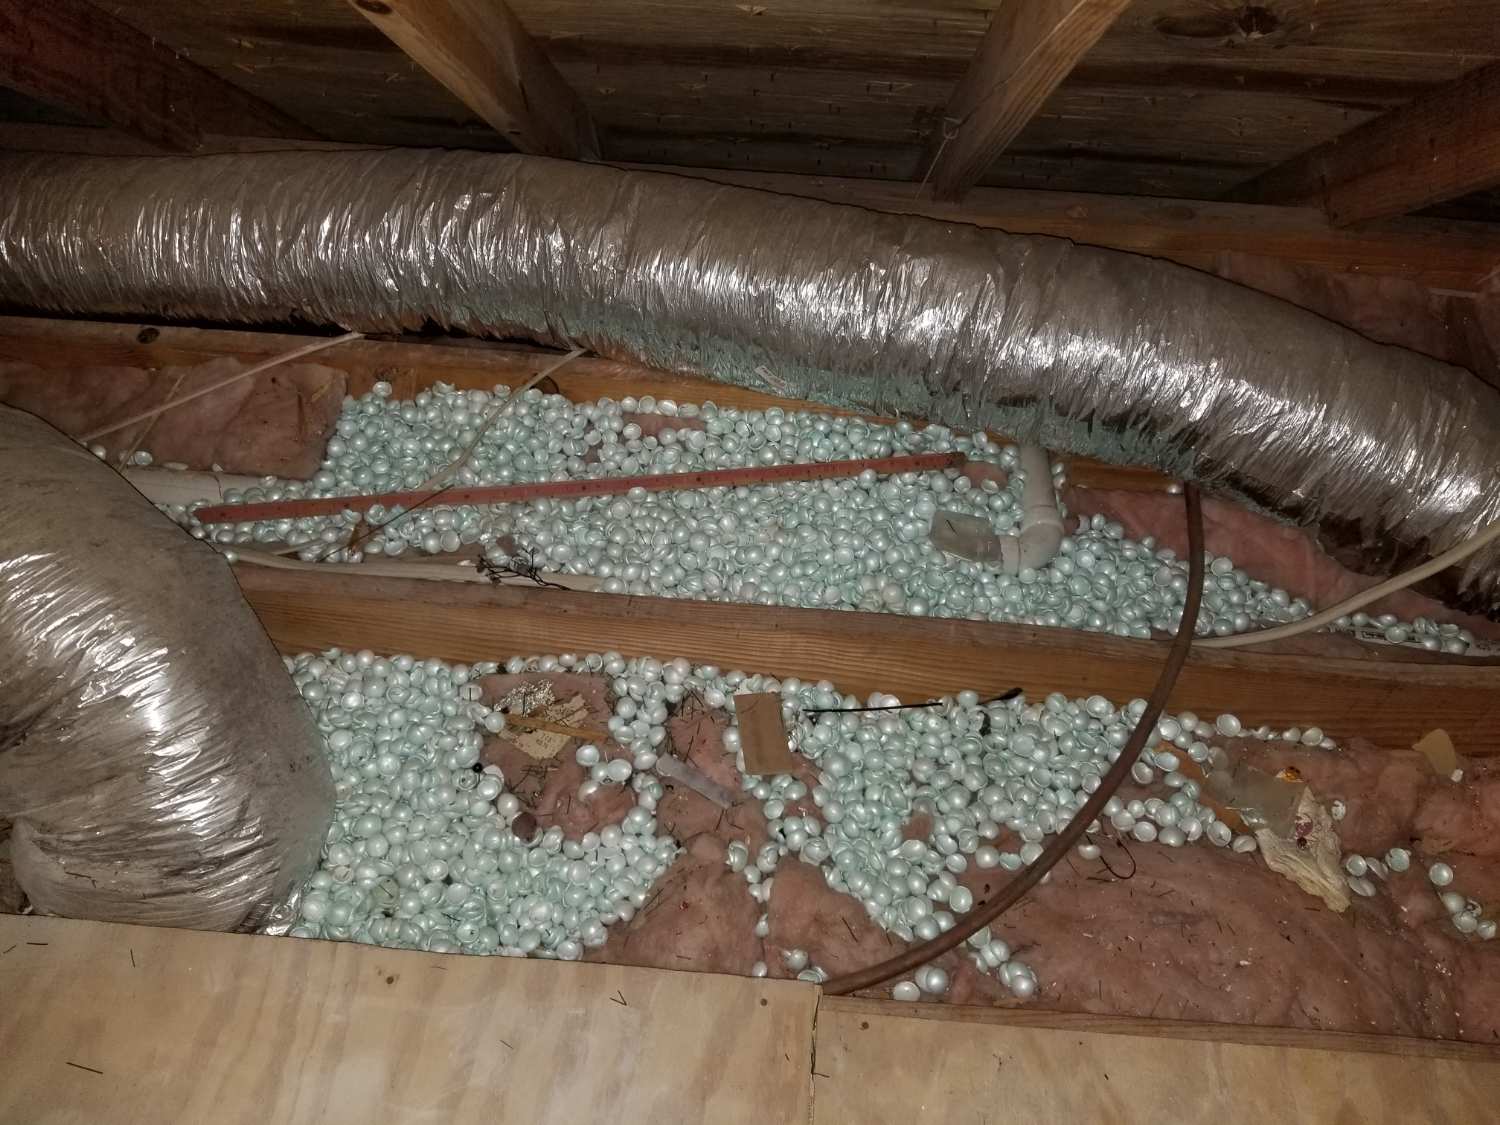 Pic of insulation seen during a home inspection of the attic